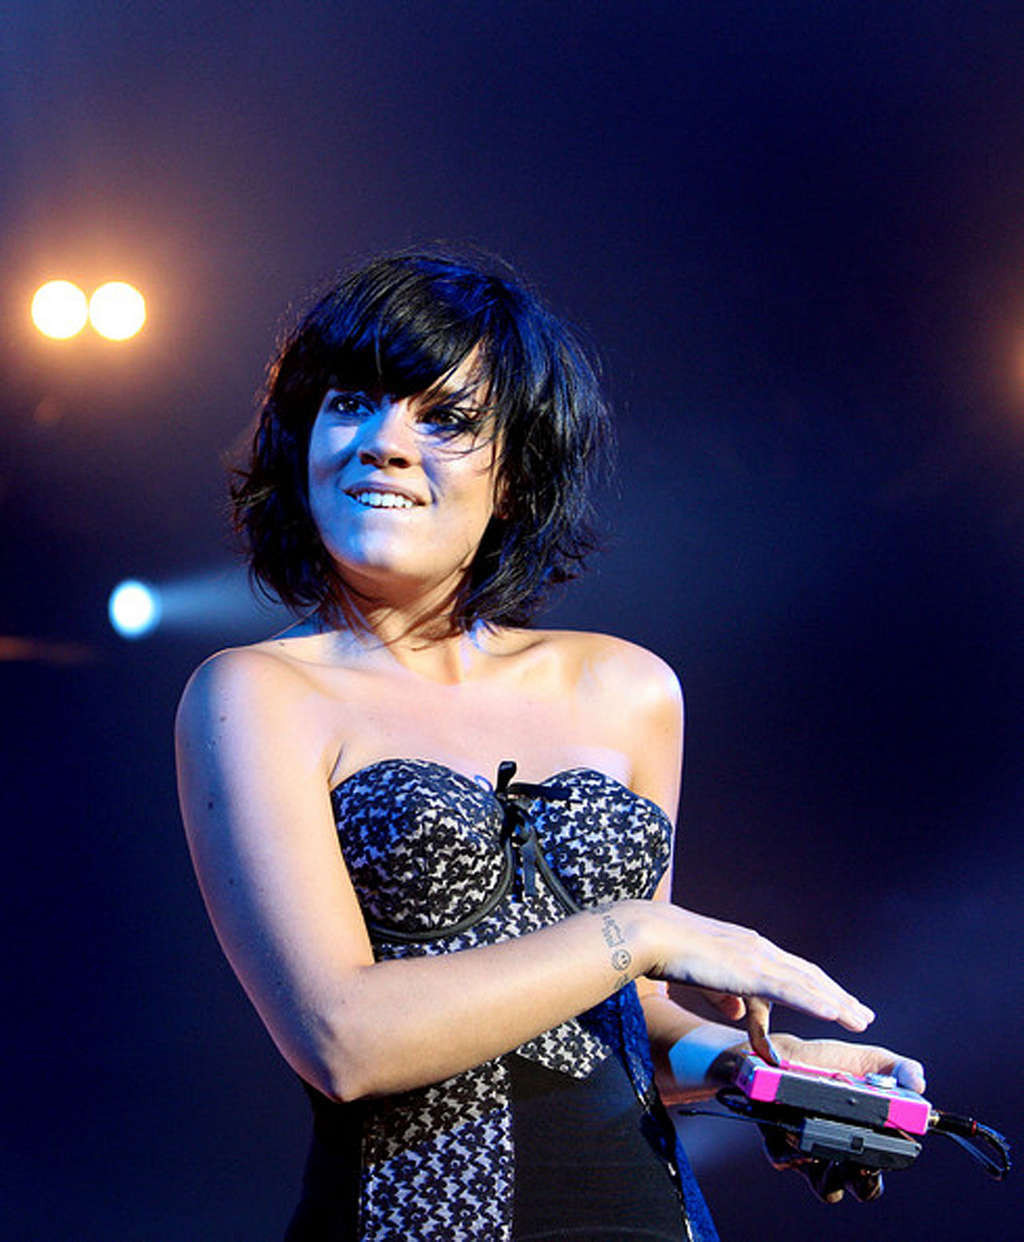 Lily Allen major upskirt on stage paparazzi pictures #75362821